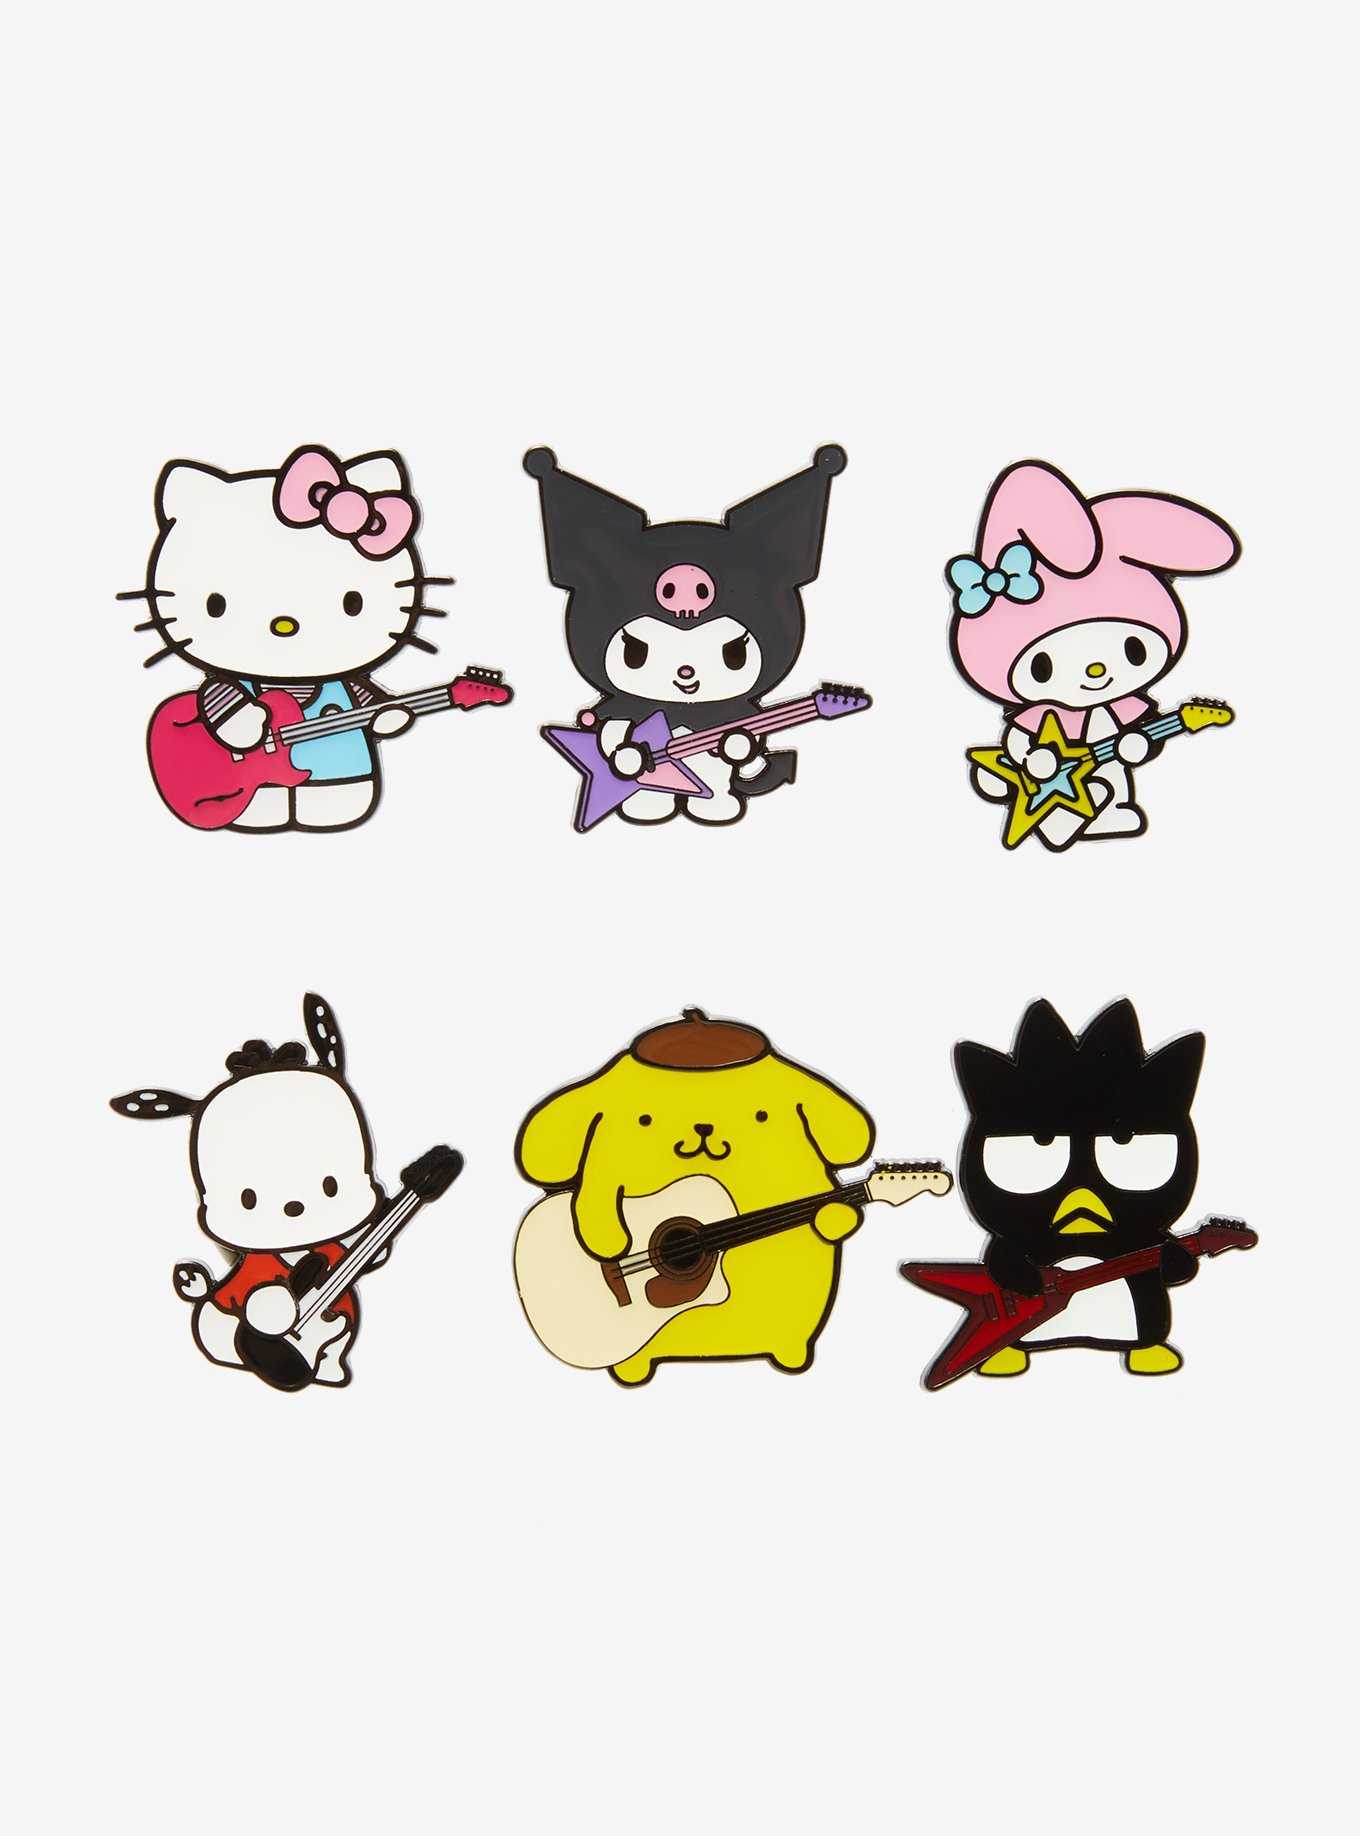 Sanrio White/Colorless Pins for Women